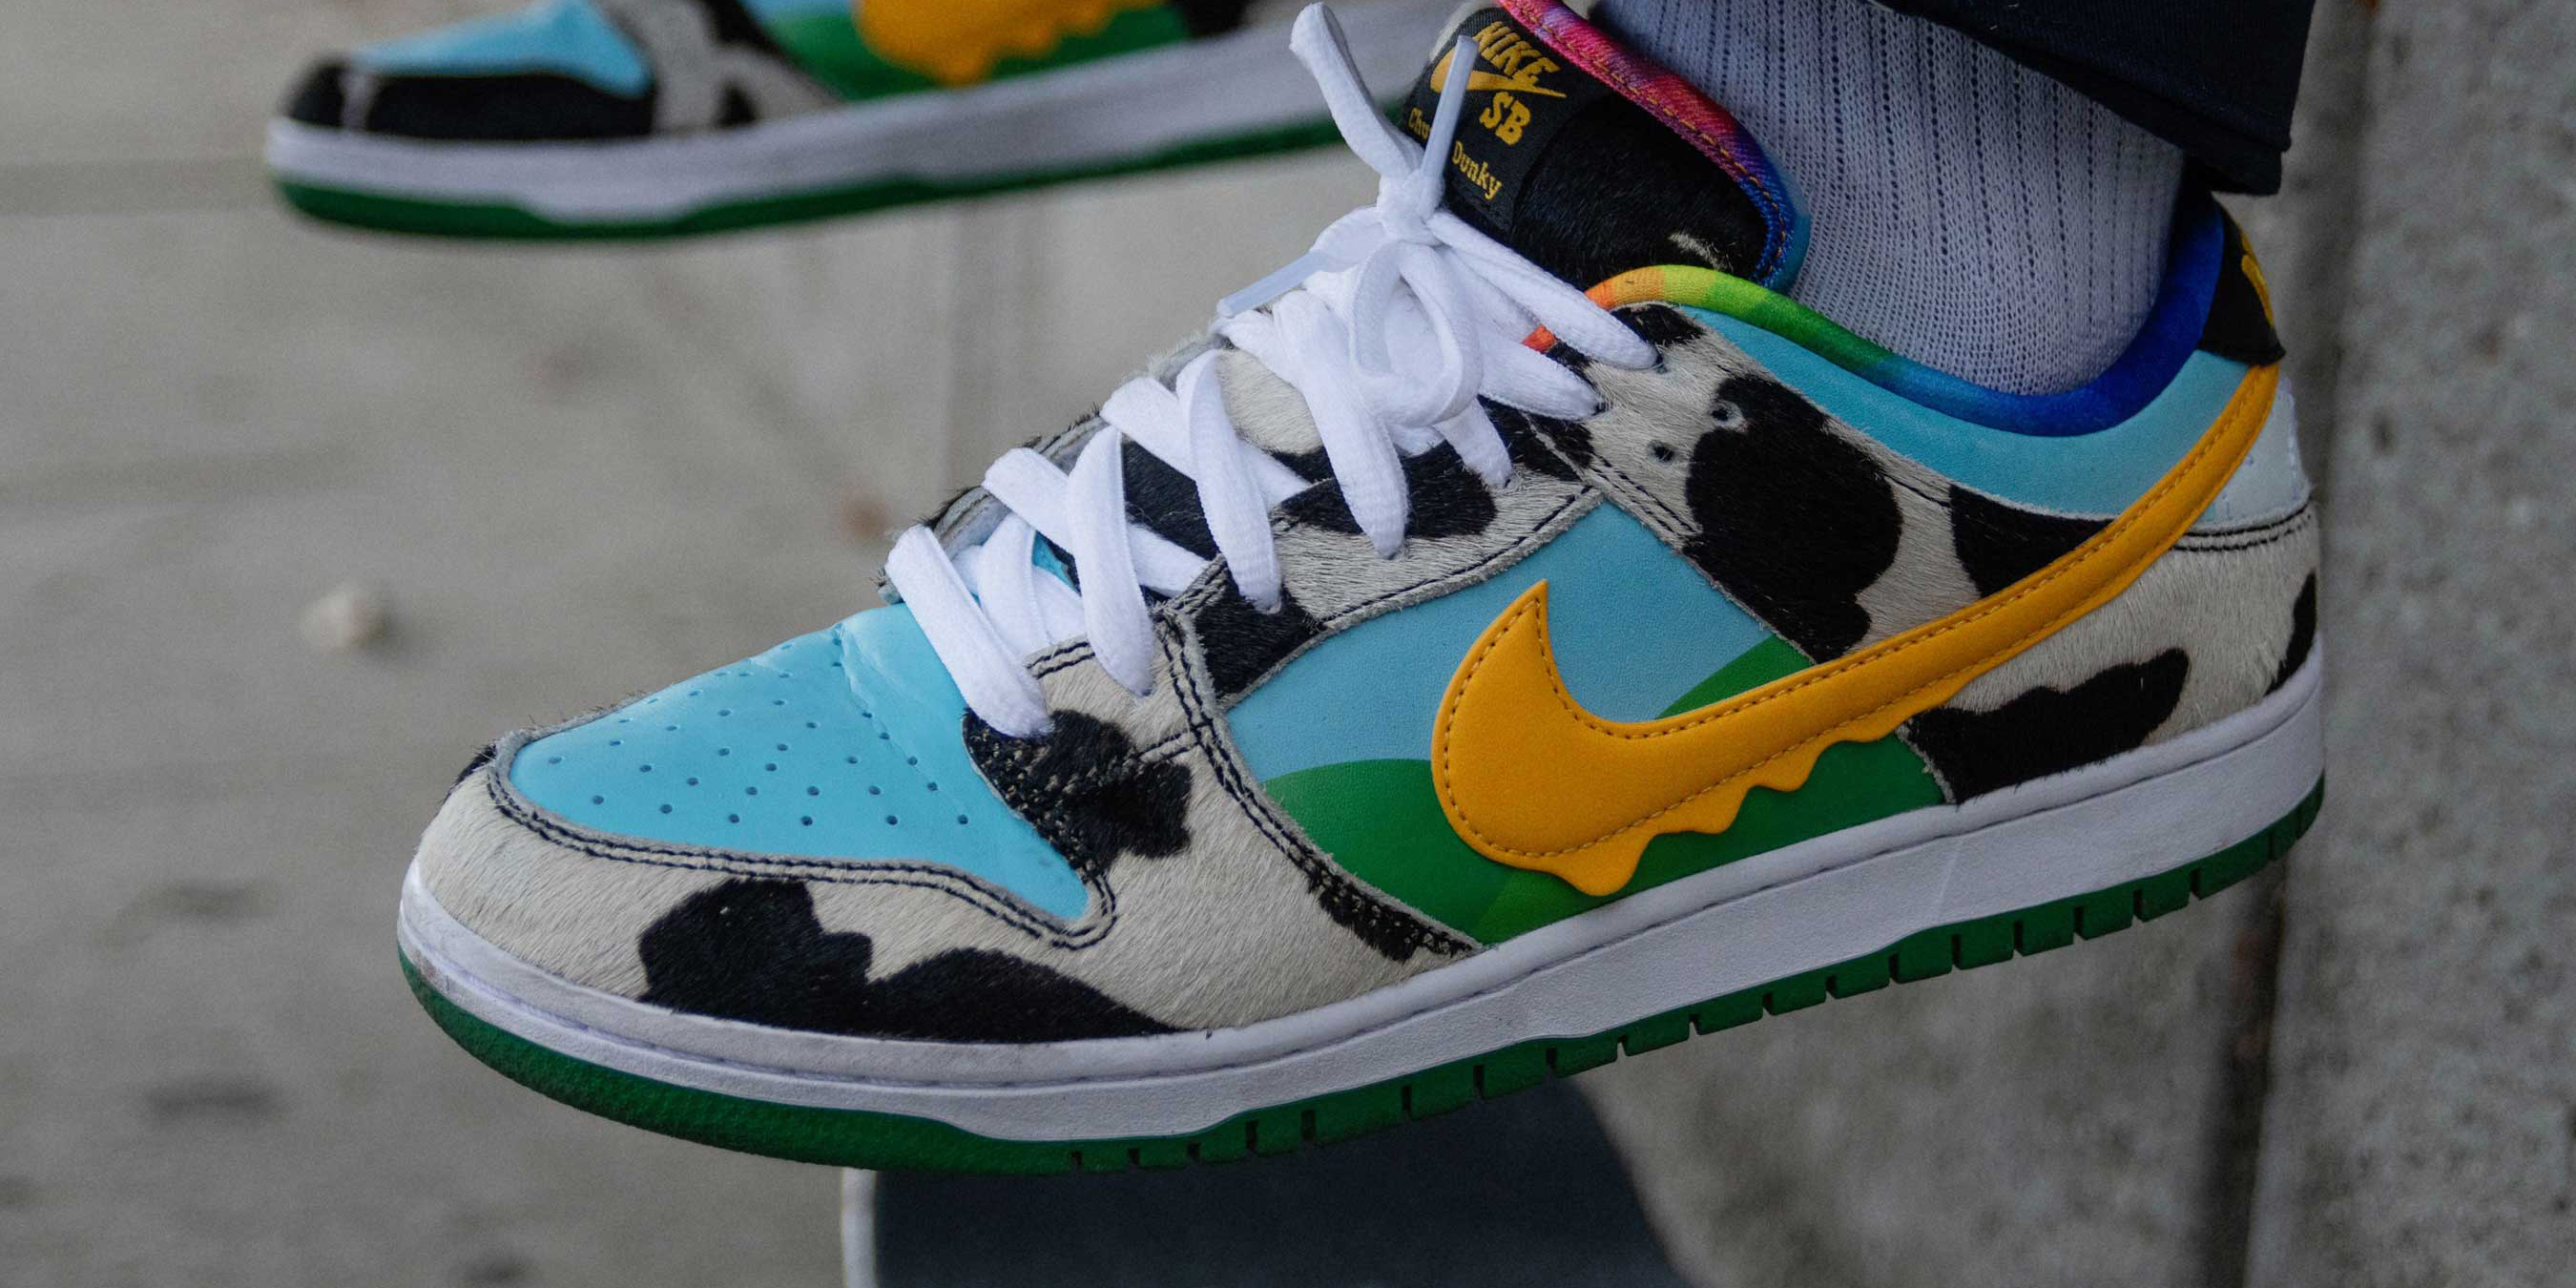 Nike SB collabs with Ben & Jerry's for a limited edition run ...